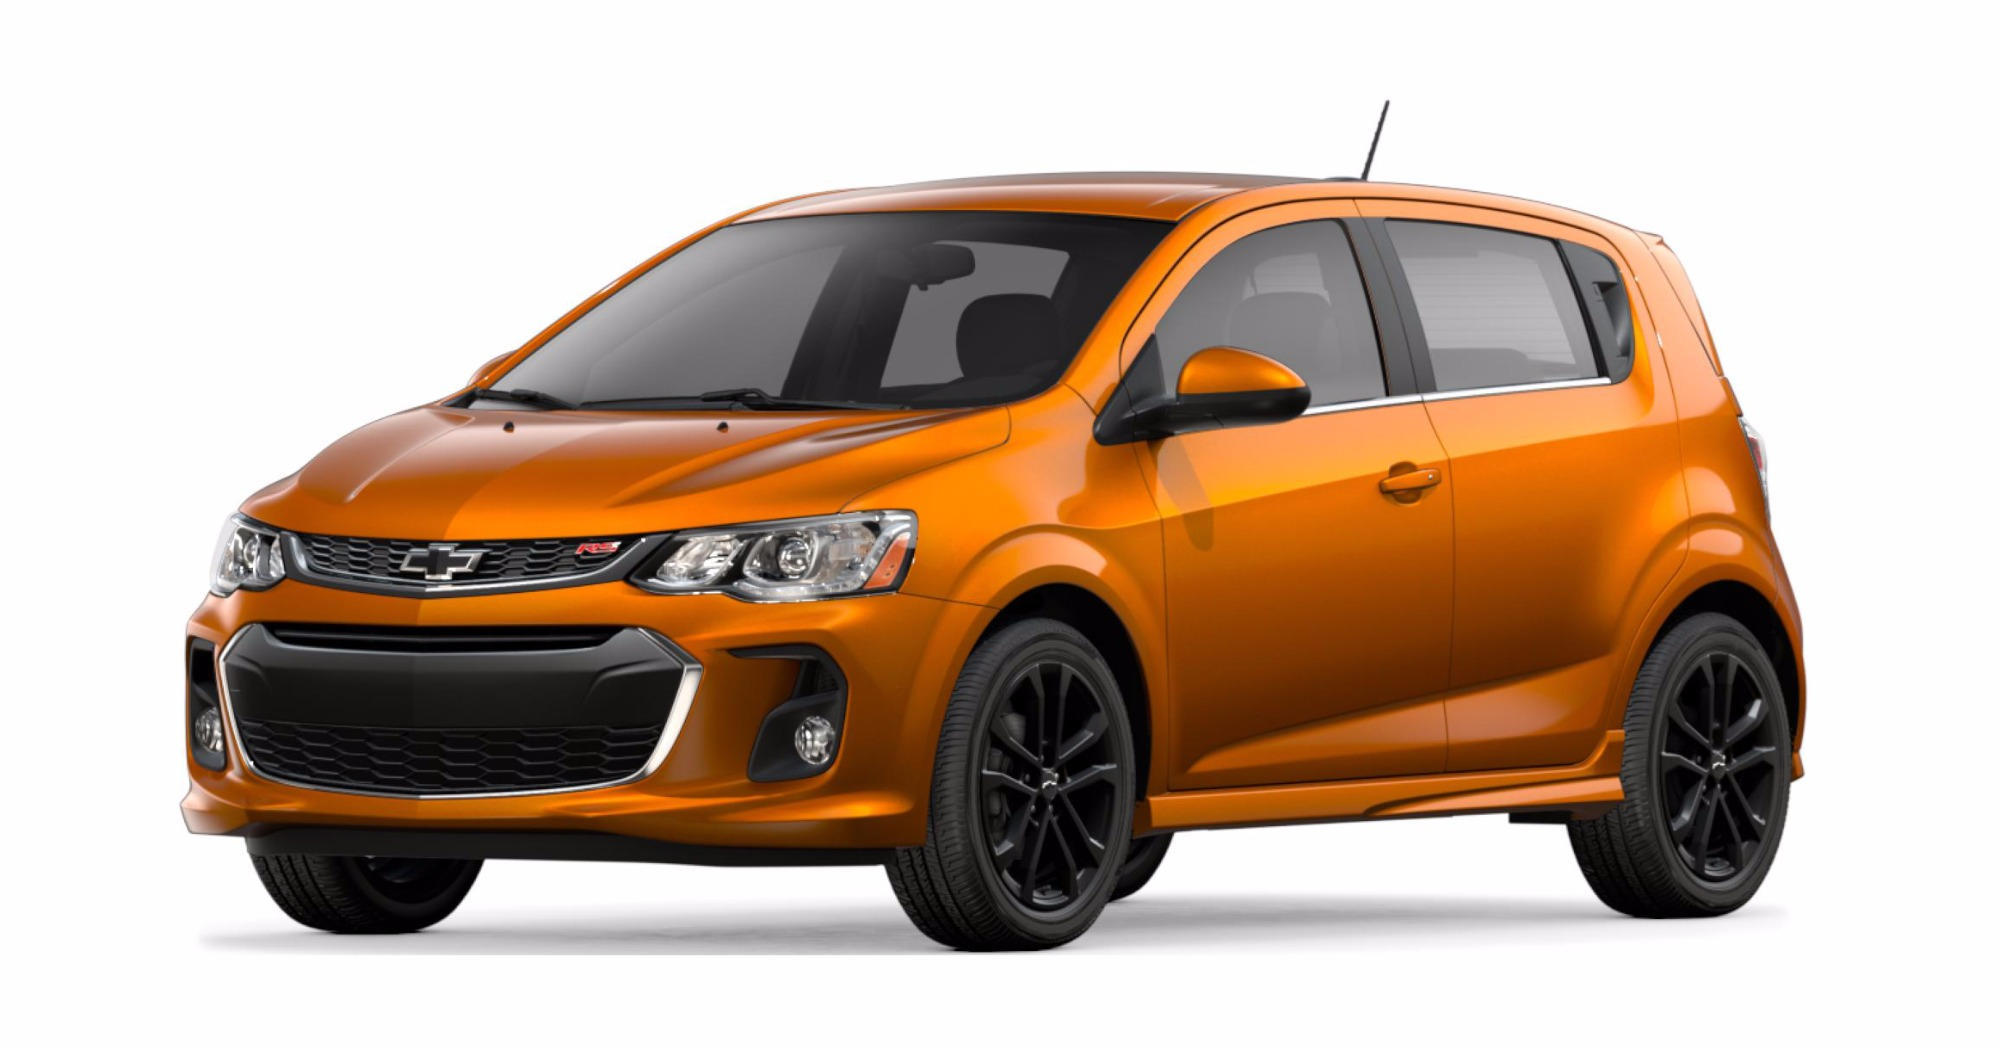 2020 Chevrolet Sonic LT Hatchback Full Specs, Features and Price | CarBuzz